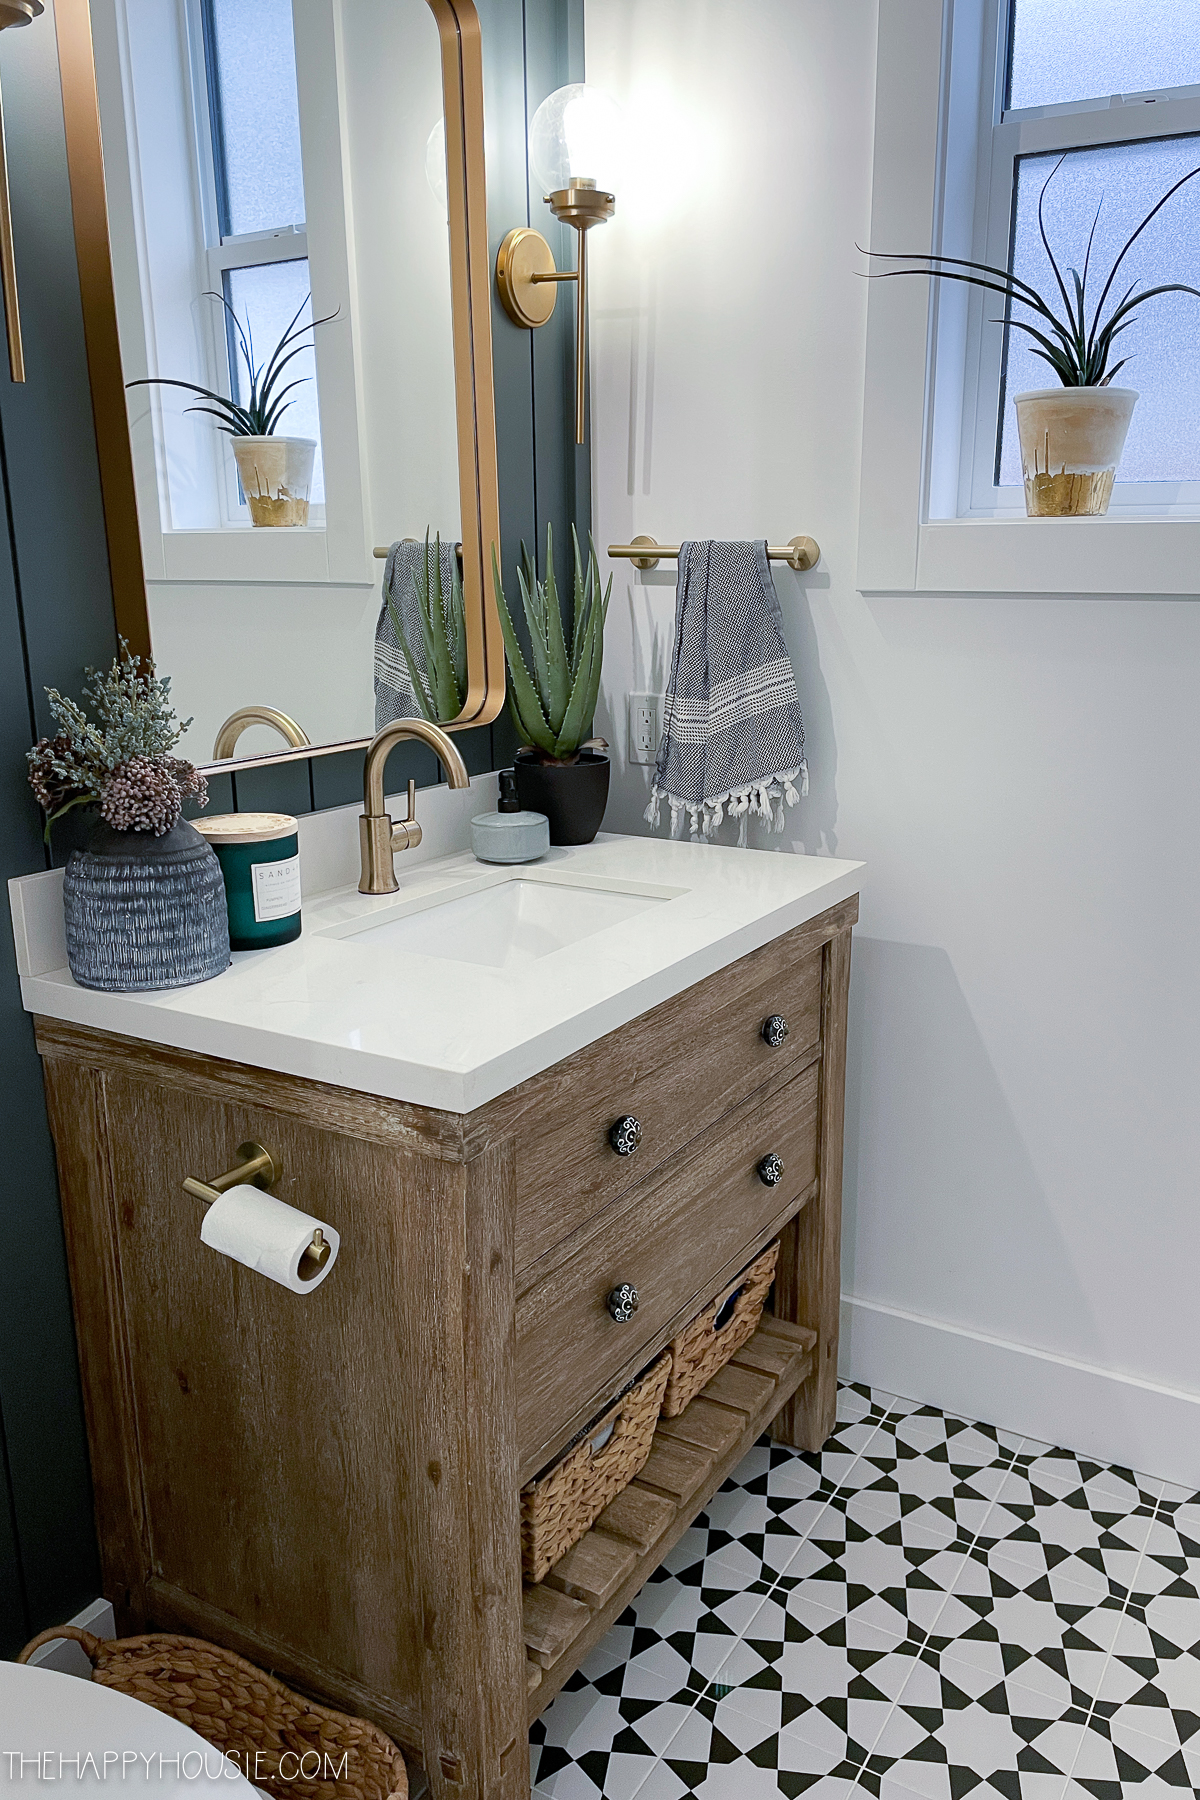 https://www.thehappyhousie.com/wp-content/uploads/2022/01/bathroom-cabinet-organization-ideas-and-how-to-organize-your-bathroom-11.jpg